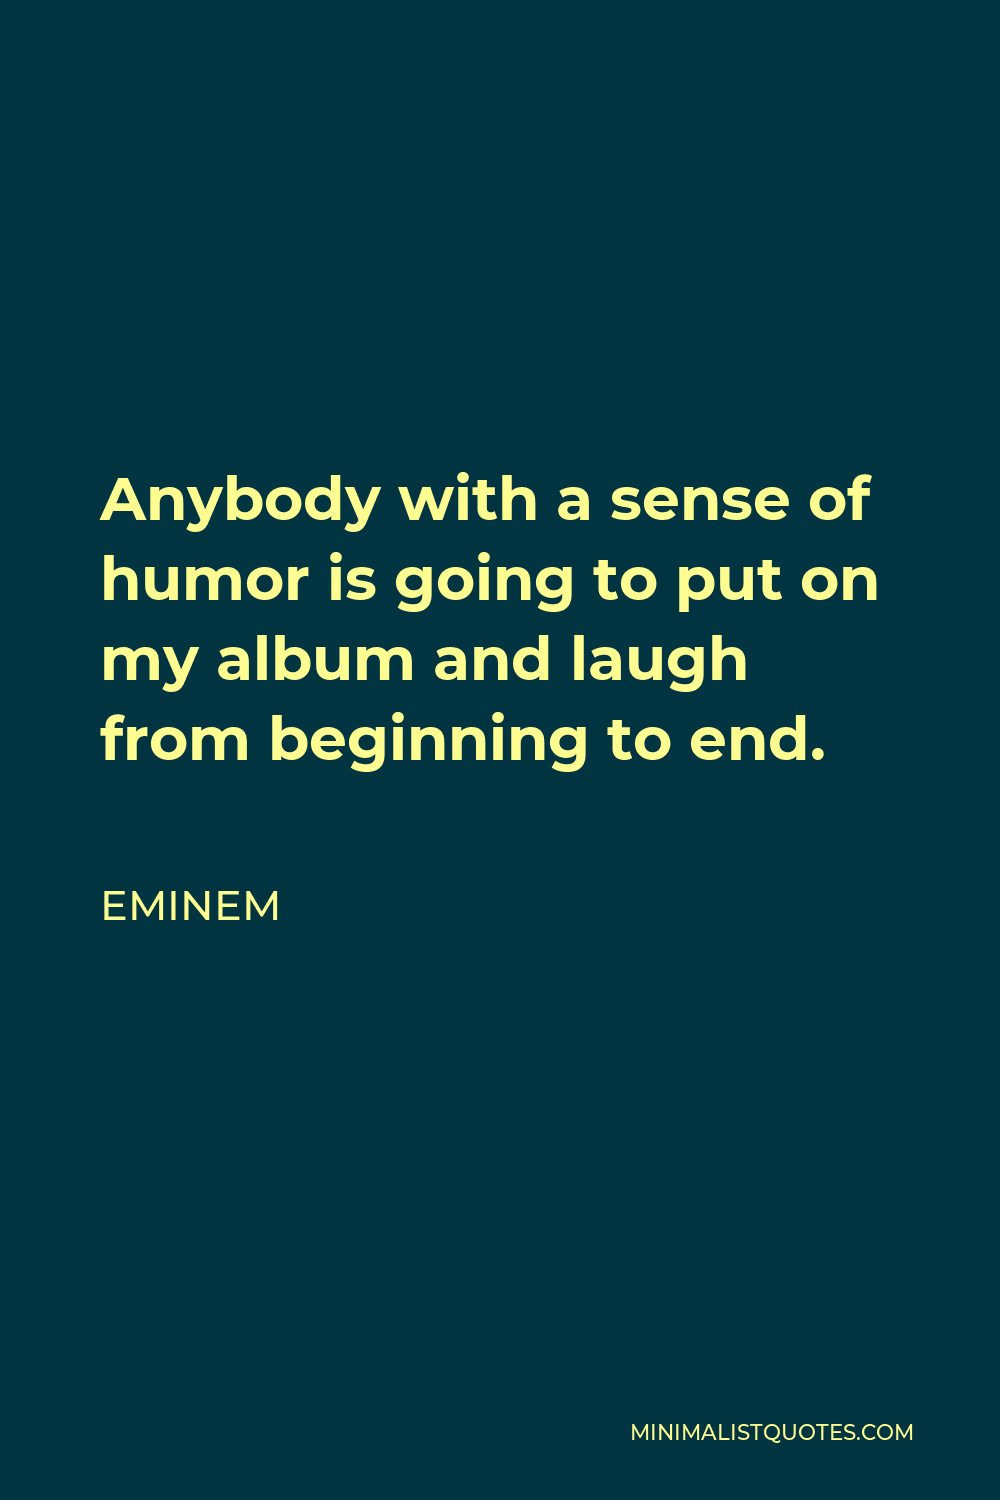 Eminem Quote - Anybody with a sense of humor is going to put on my album and laugh from beginning to end.